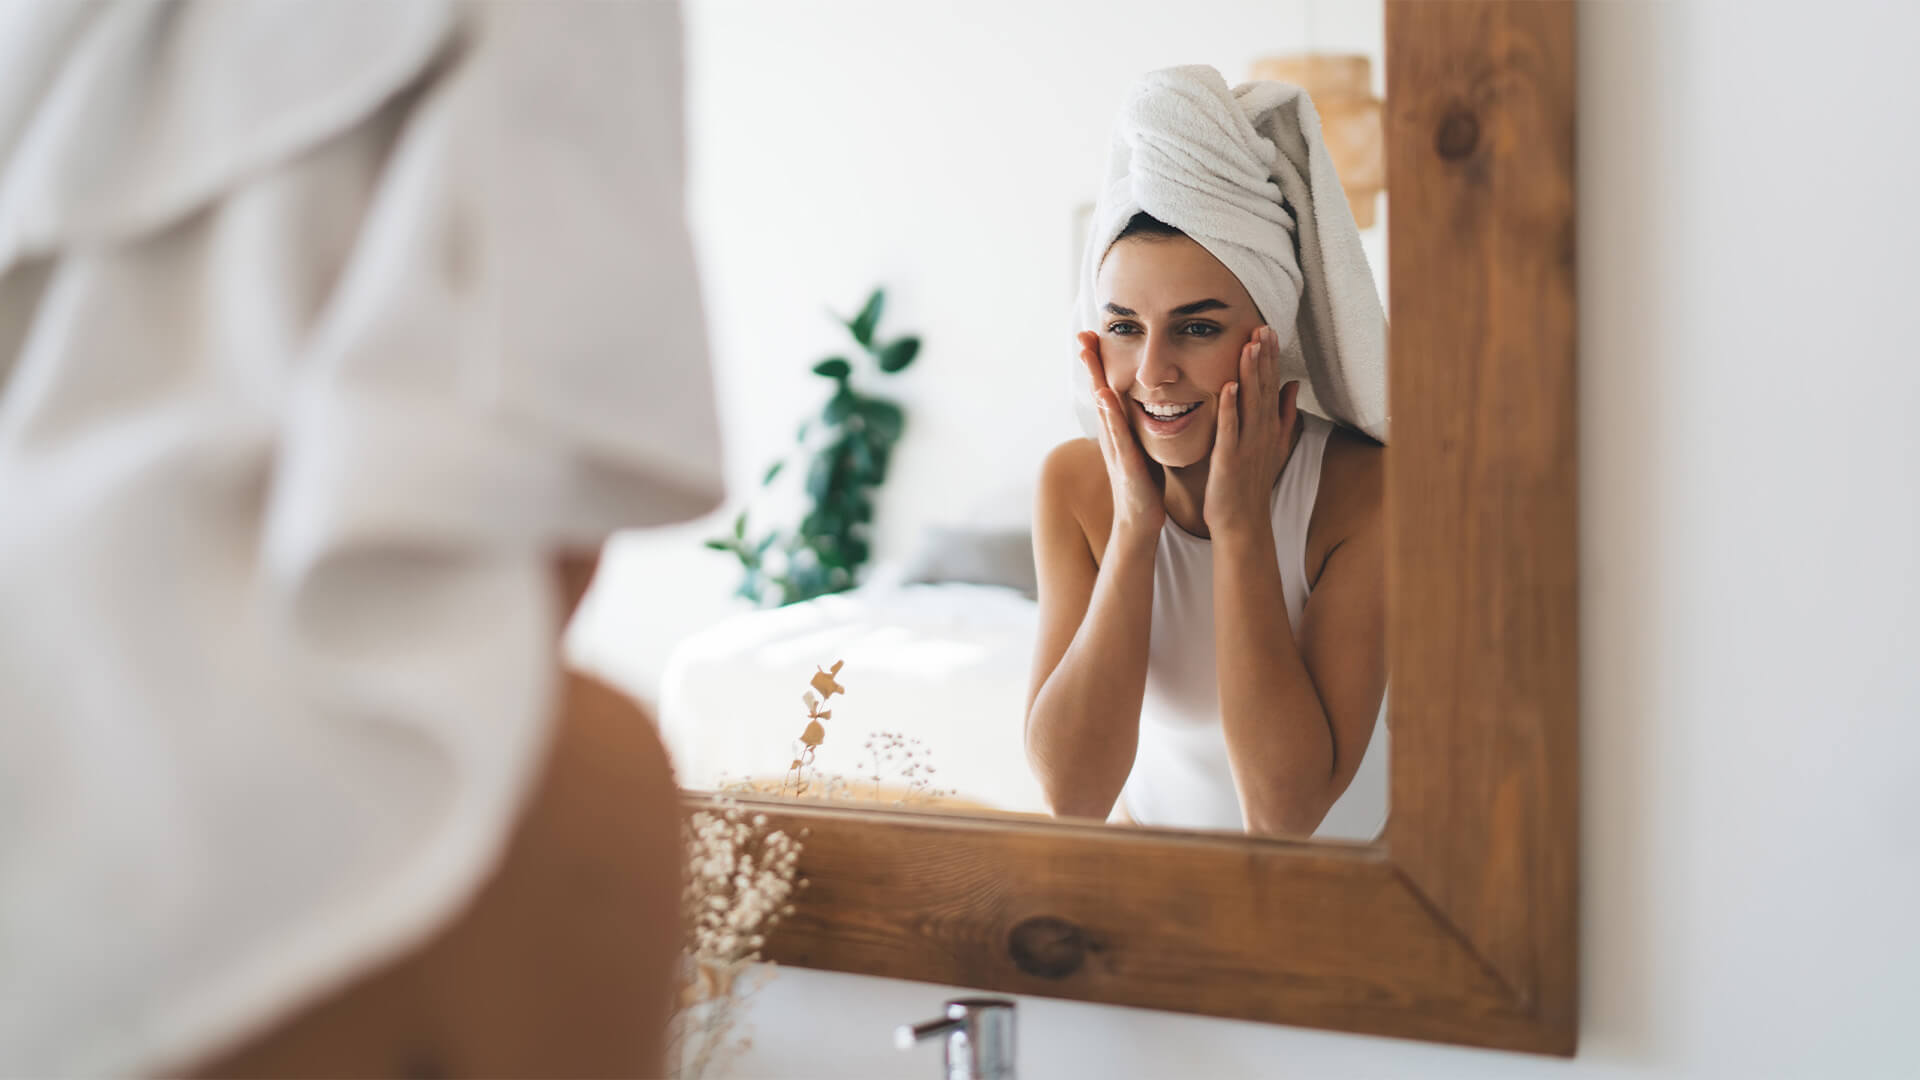 Young beautiful female with towel on head smiling to mirror reflection standing in the bathroom at home.